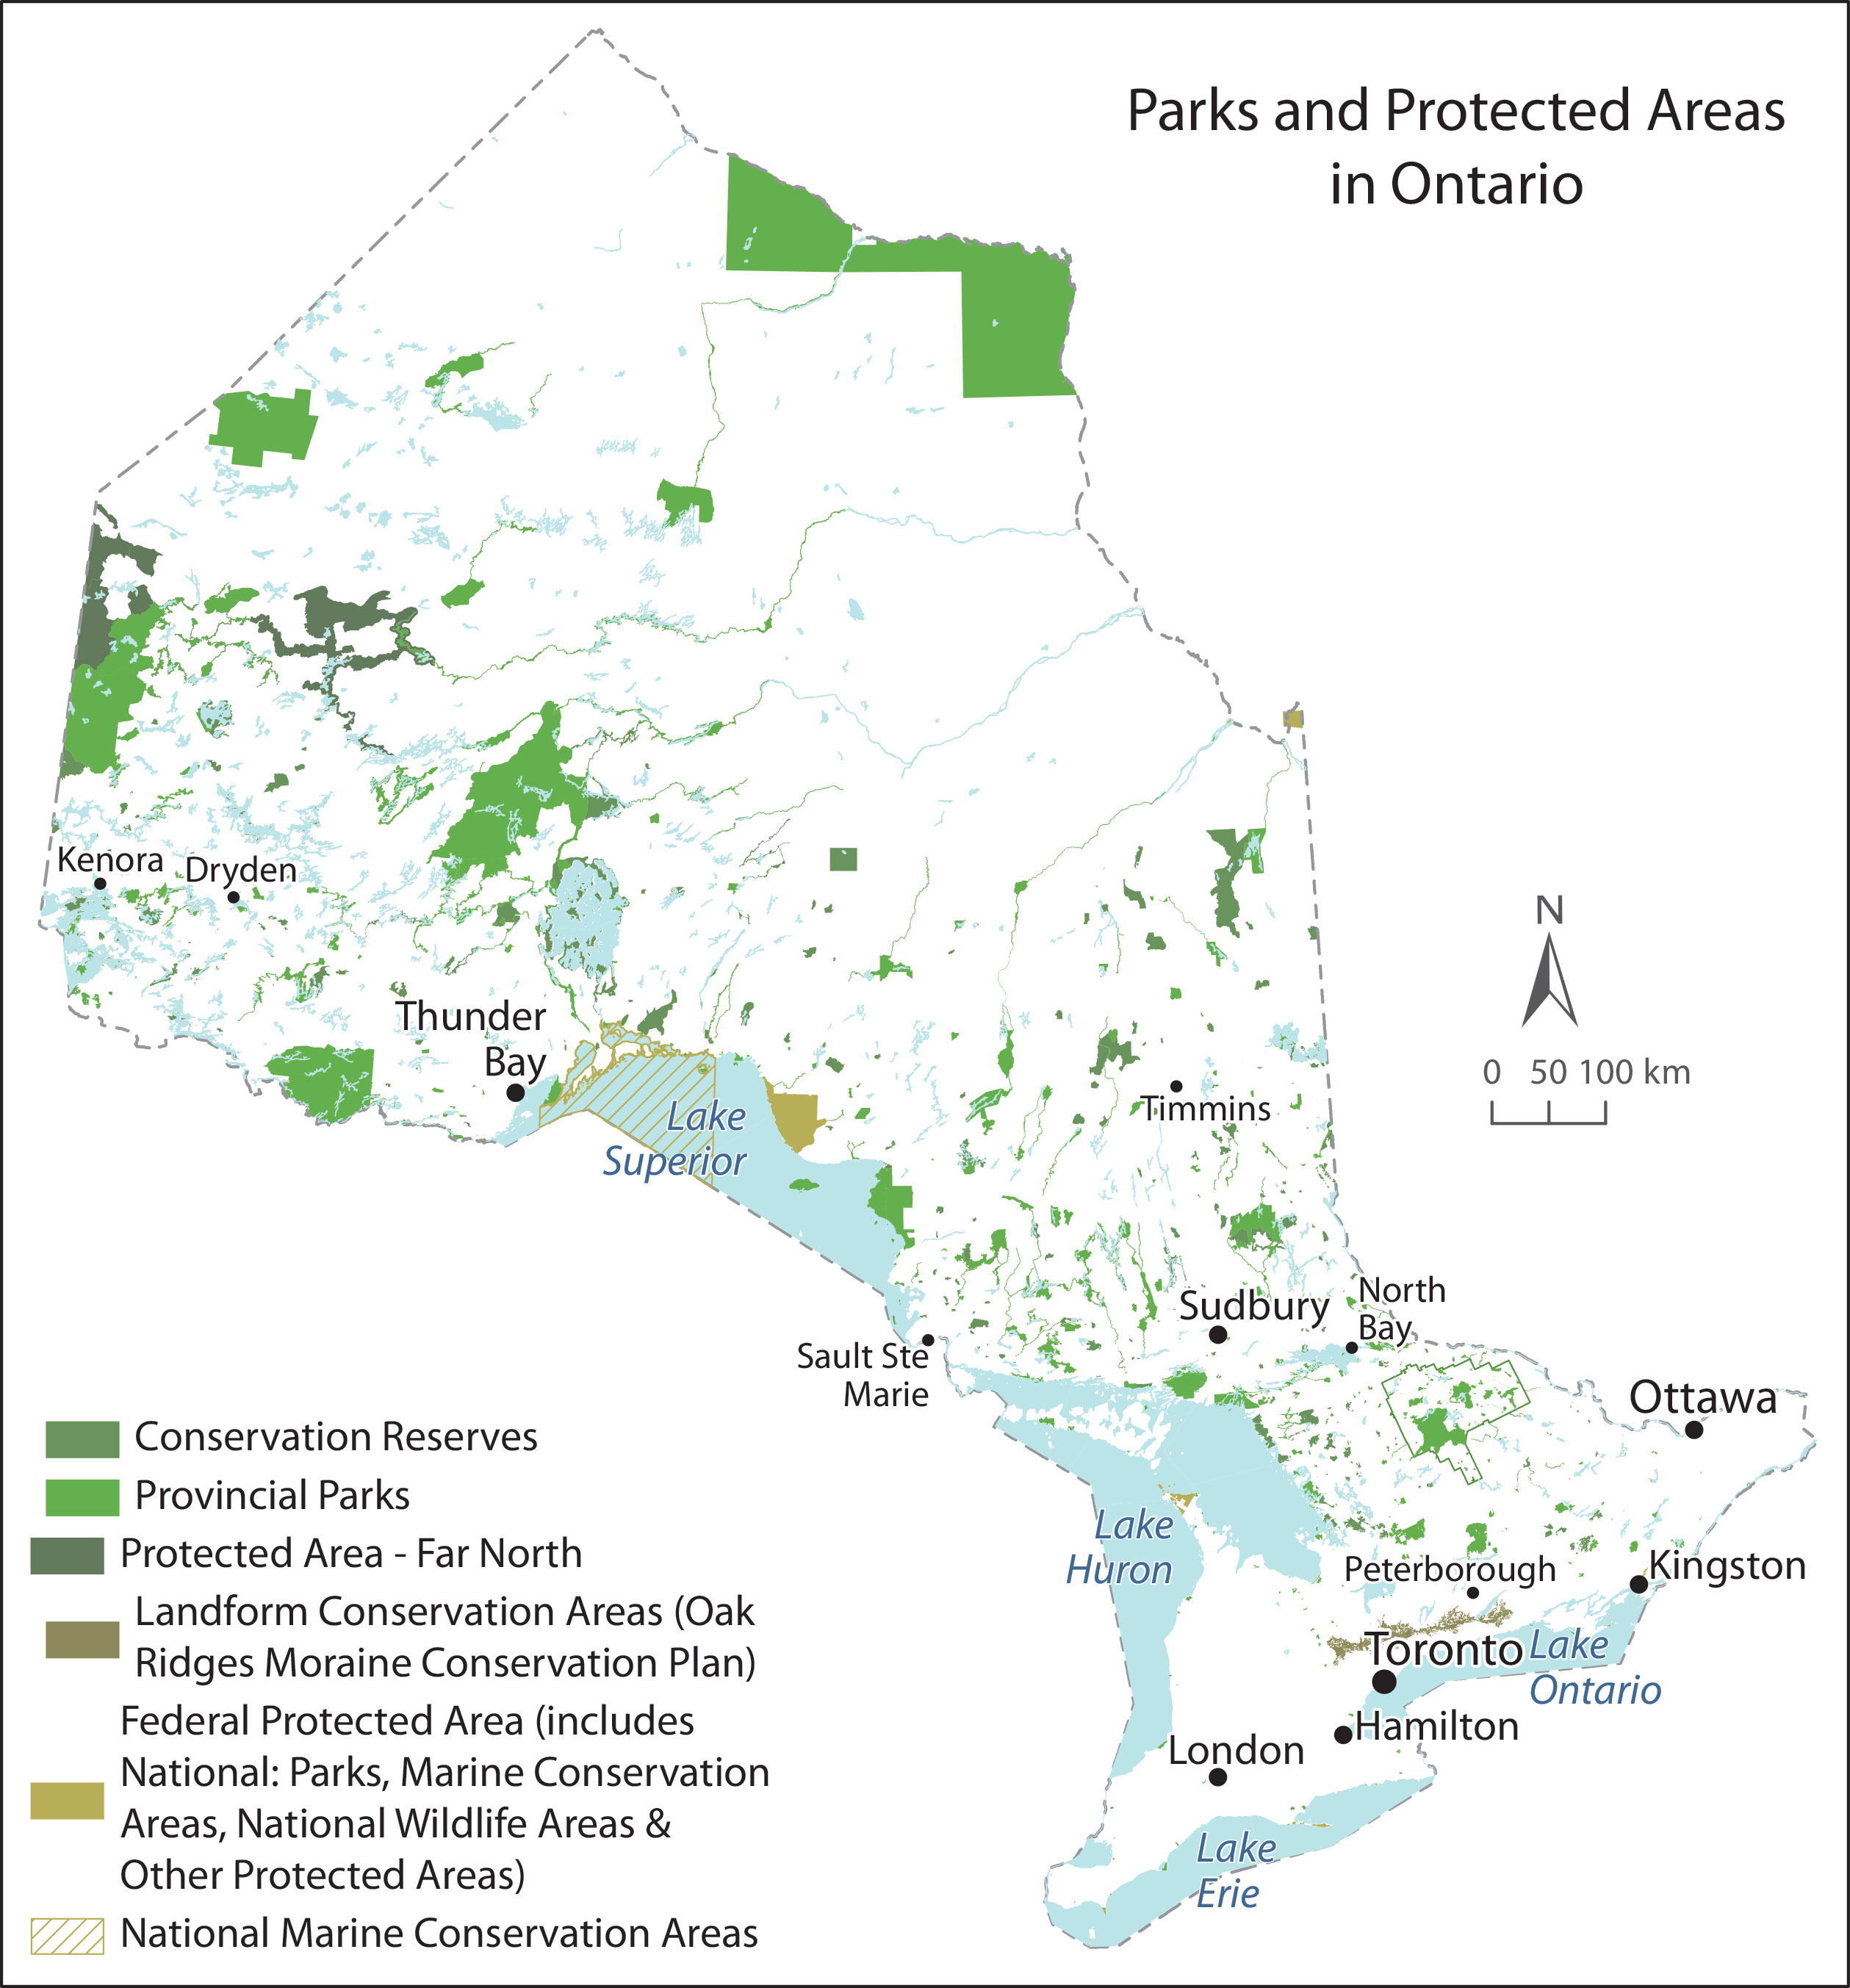 Parks and protected areas in Ontario